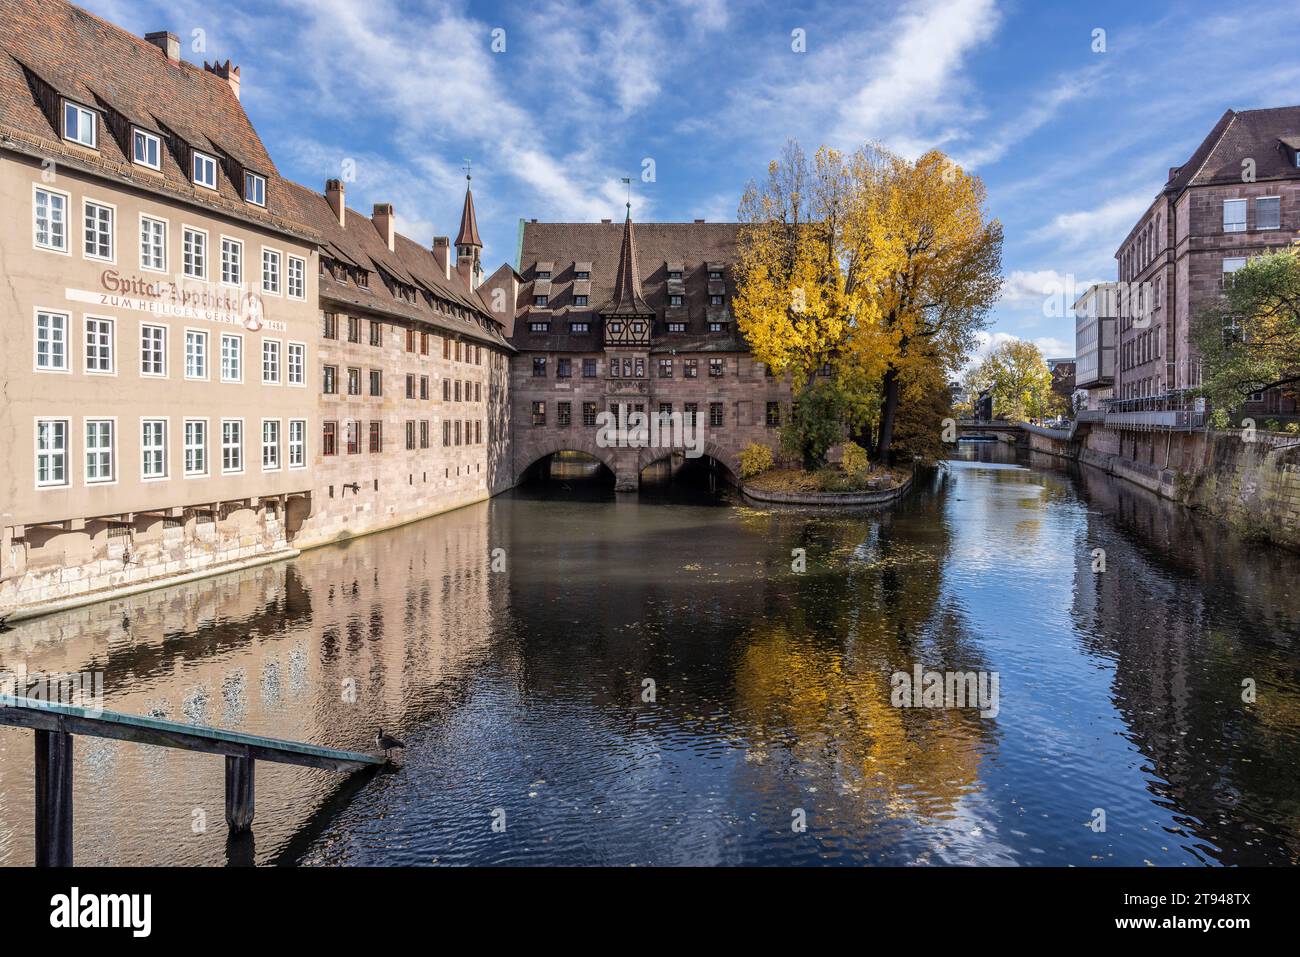 Heilig-Geist-Spital (Holy Spirit Hospital) and Pegnitz River from Museumbrucke, Old Town, Nuremberg, Germany Stock Photo